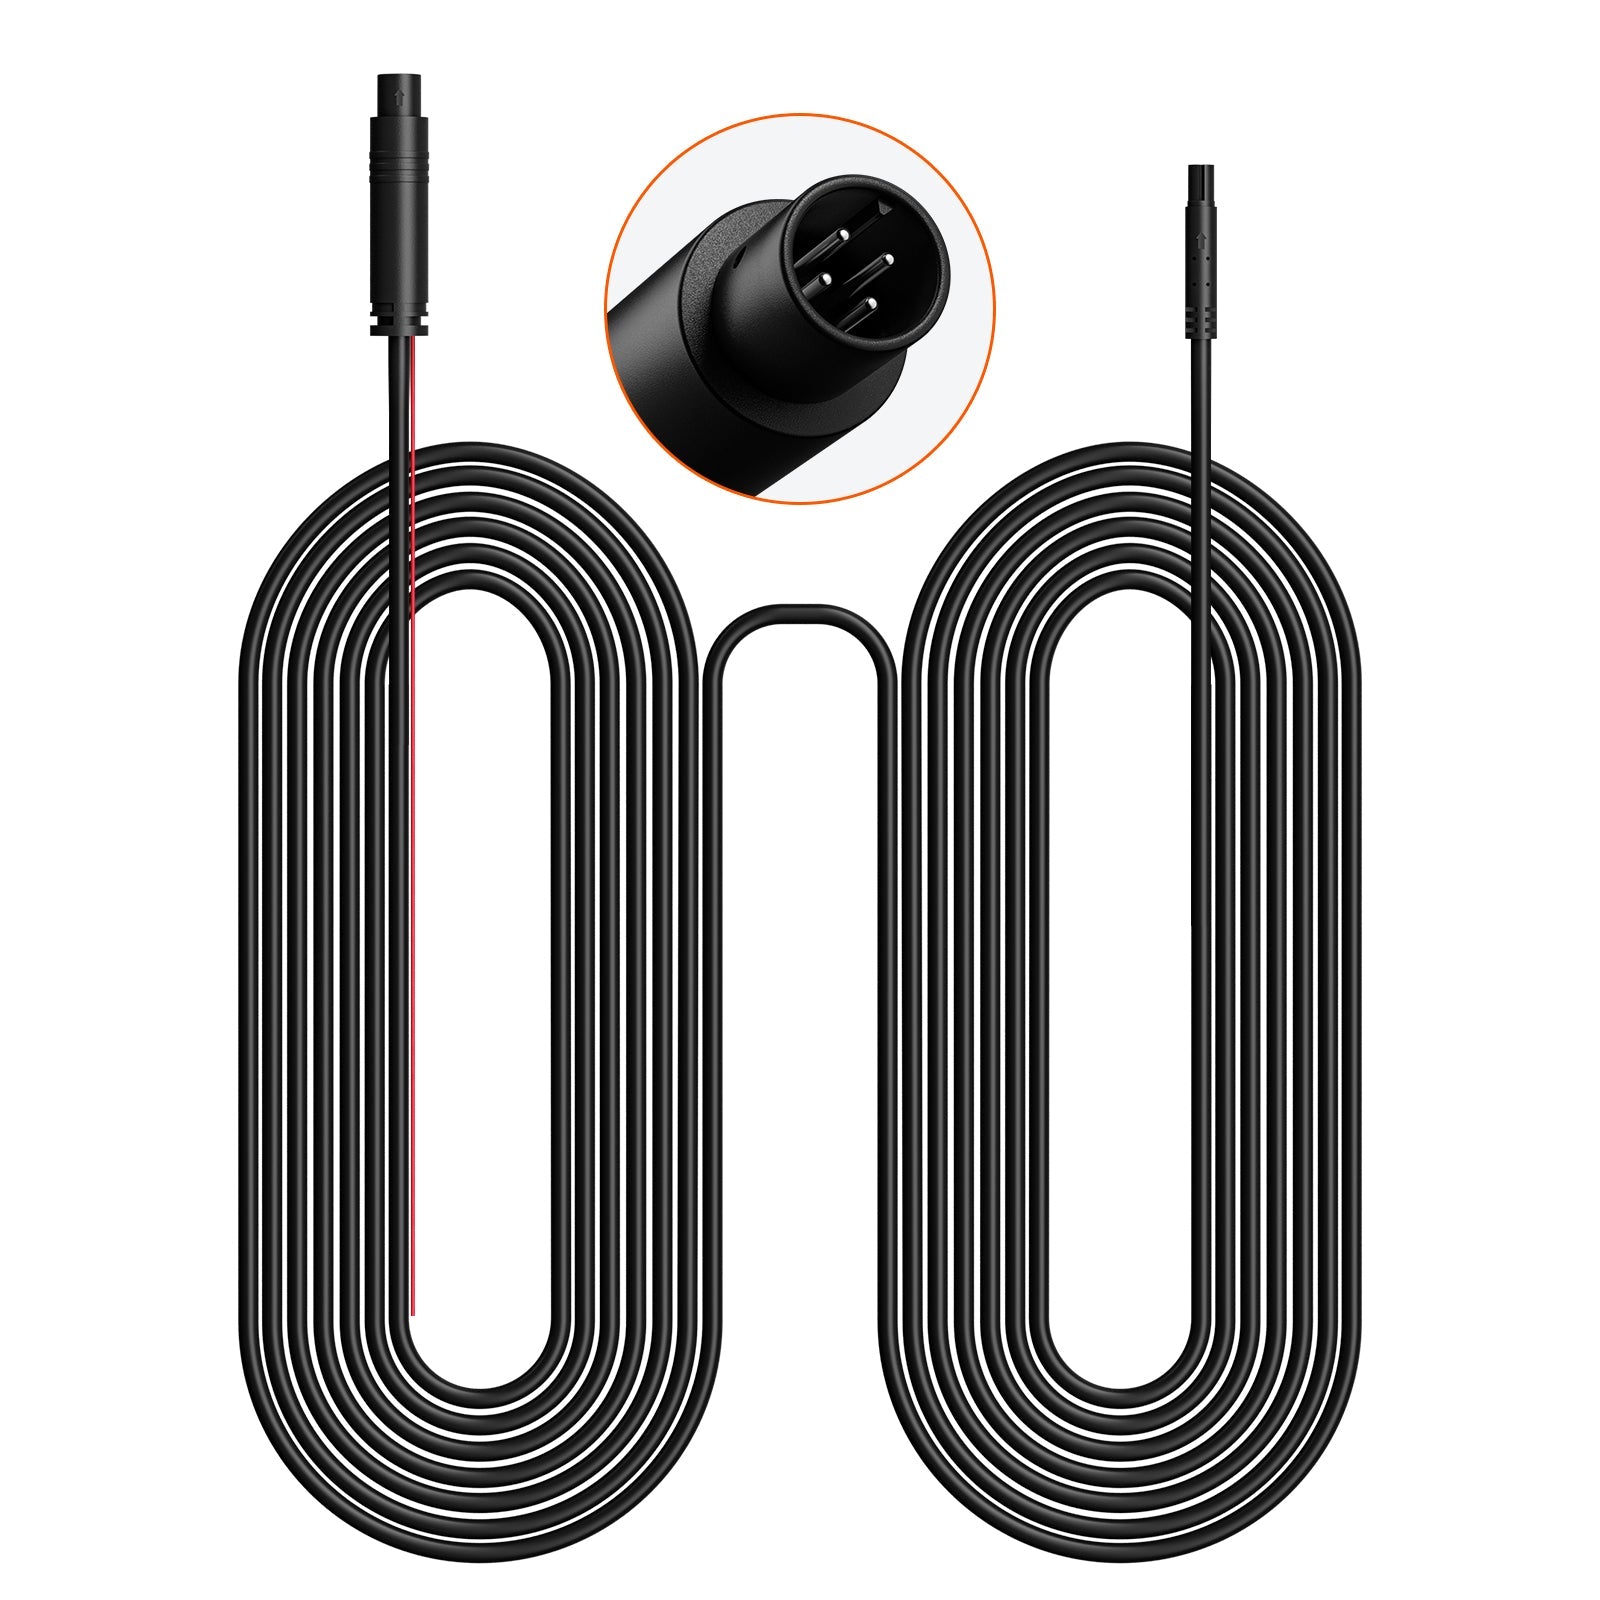 WOLFBOX G890 33Feet Rear Camera Extension Cord Cable Accessory WOLFBOX   